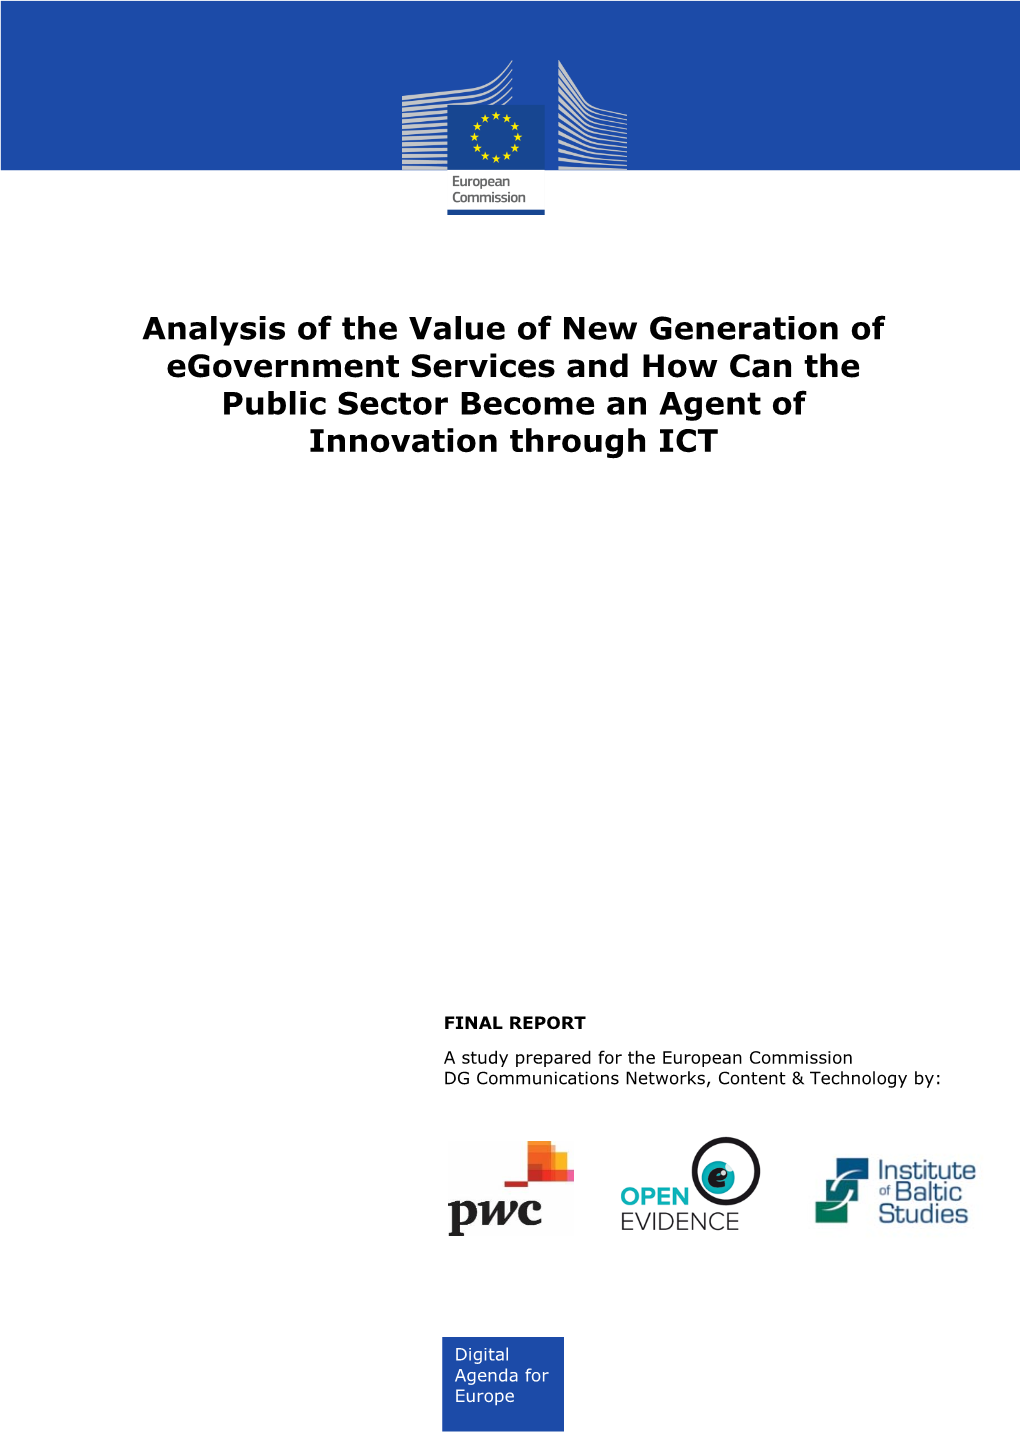 Analysis of the Value of New Generation of Egovernment Services and How Can the Public Sector Become an Agent of Innovation Through ICT